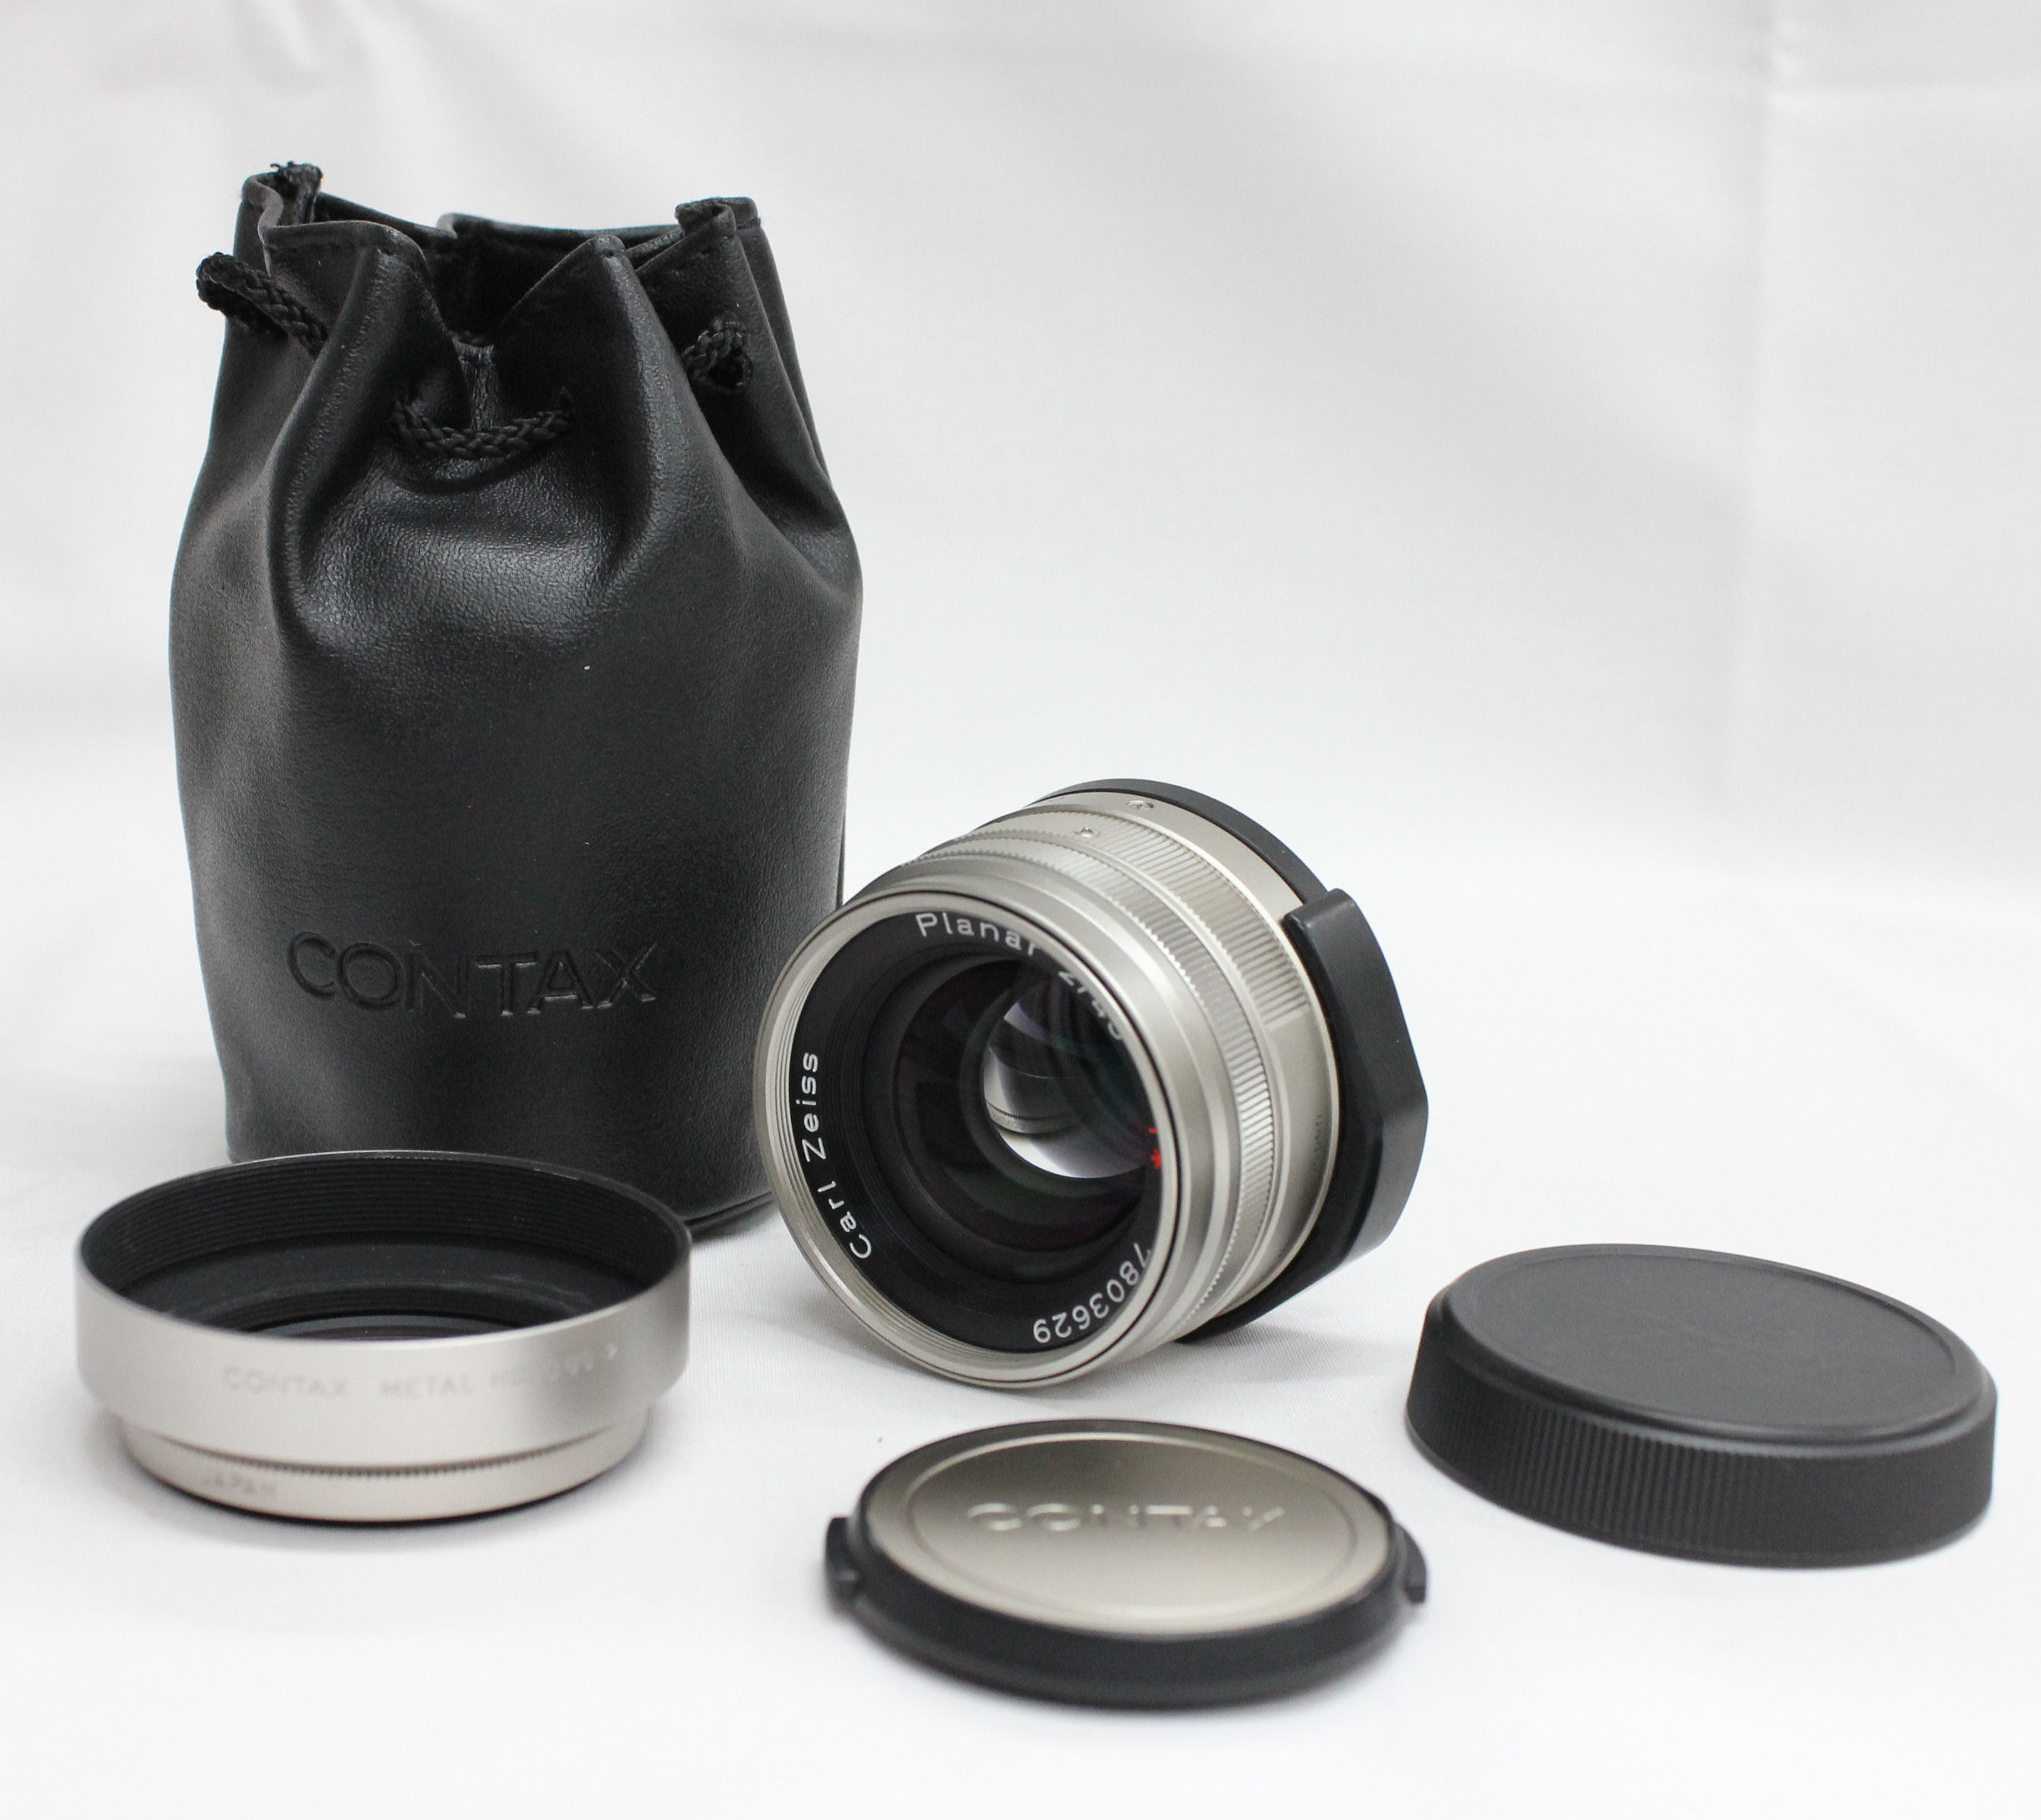 Japan Used Camera Shop | [Mint] CONTAX Carl Zeiss Planar T* 45mm f/2 for G1 G2 w/ HOOD & Case from Japan